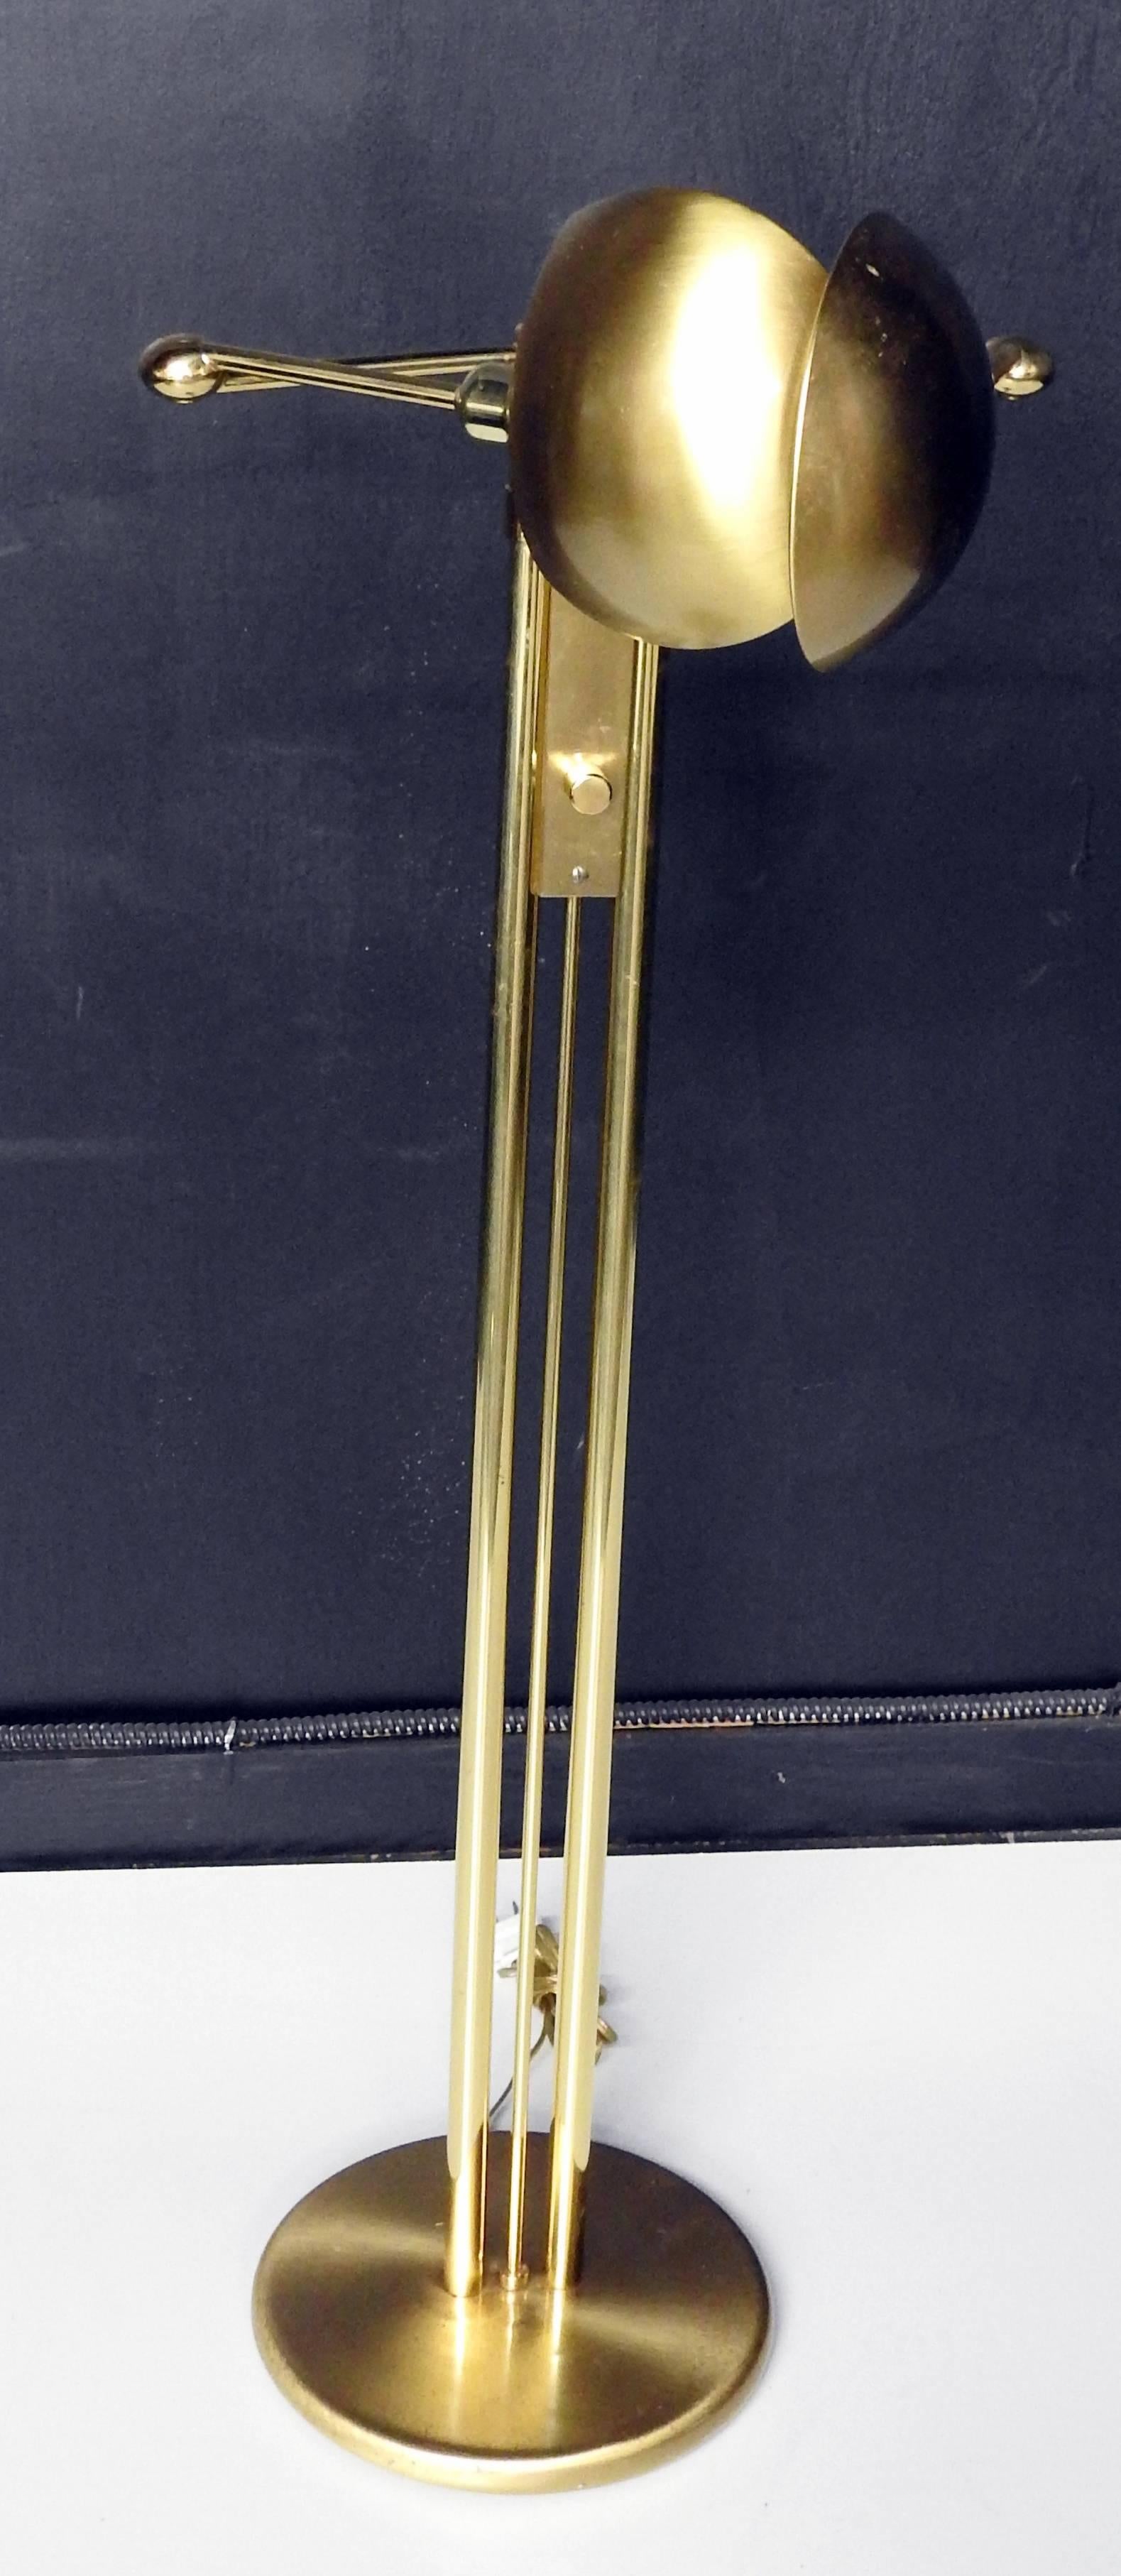 Holtkotter Leuchten brass pharmacy floor lamp has two swing arm lights for versatile lighting options. The arms are fully adjustable and dimmable. Antiqued brass finish on solid brass construction. Adjusts from 40